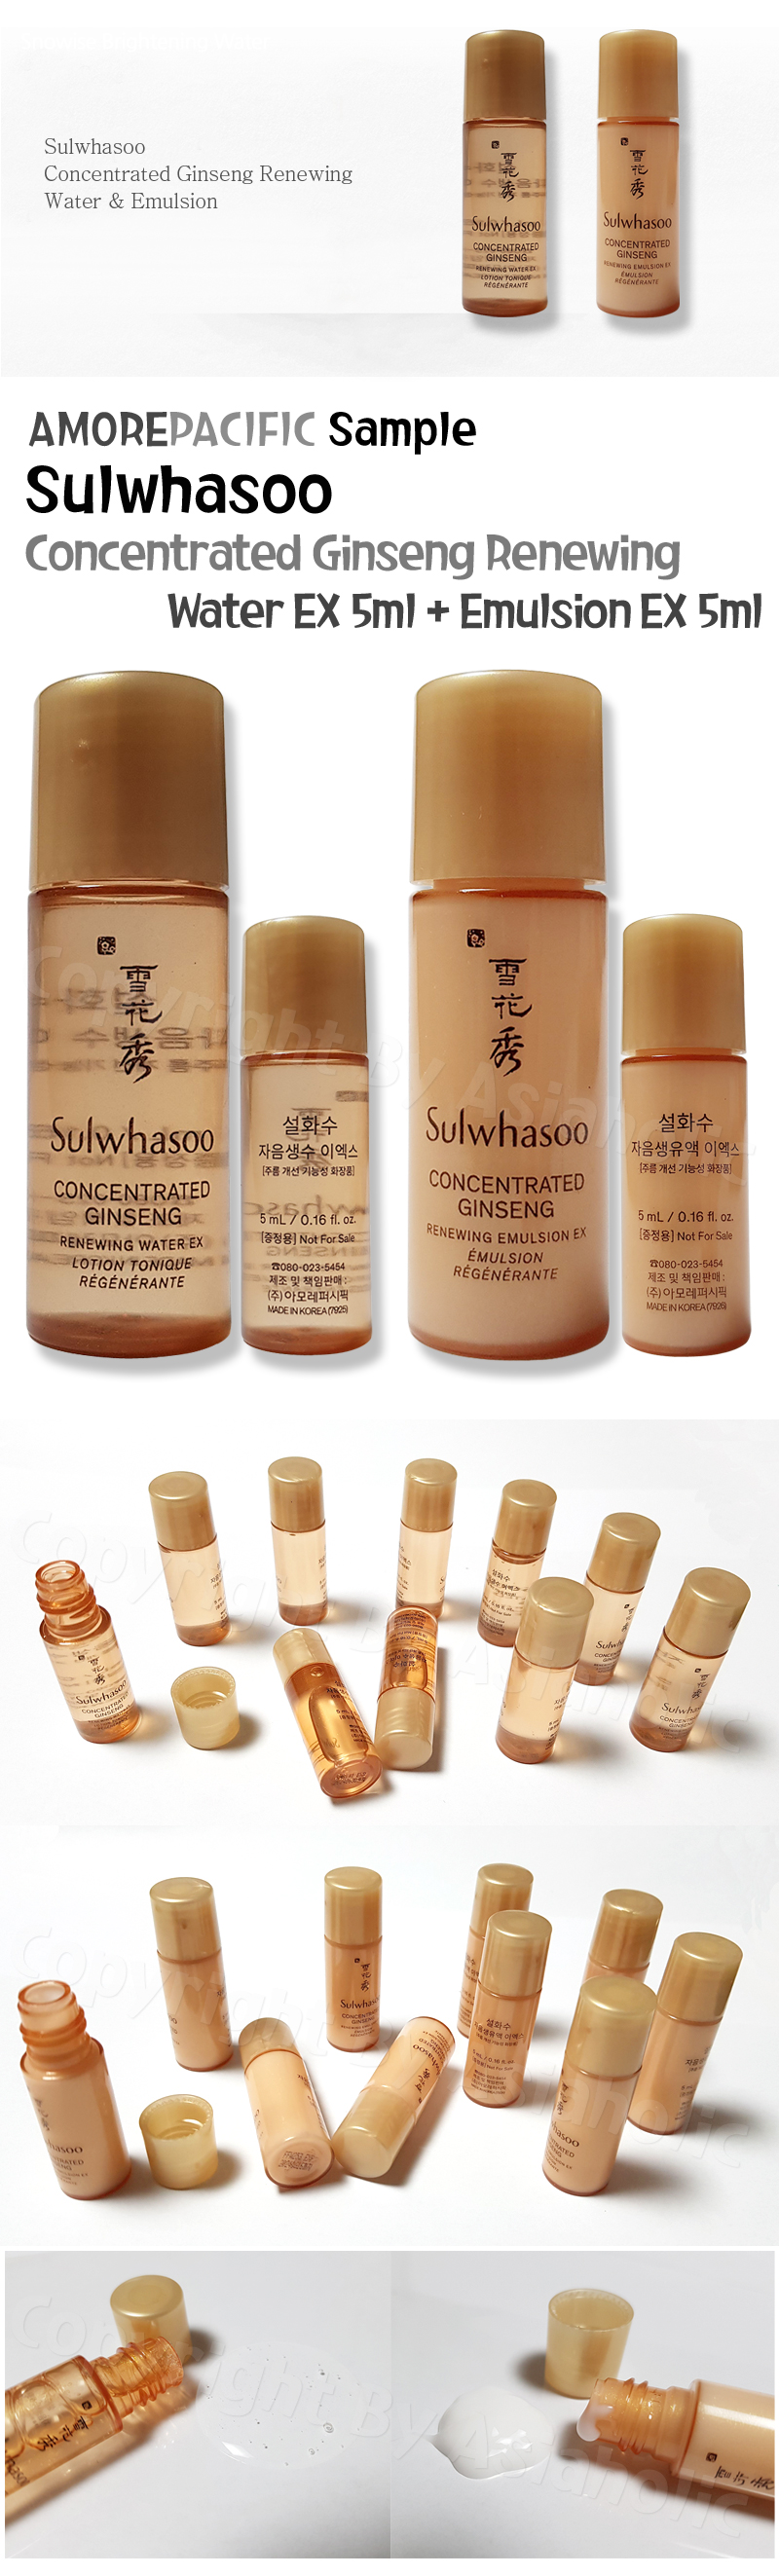 Sulwhasoo Concentrated Ginseng Renewing 5ml Water EX + Emulsion EX (8pcs~100pcs) Sample Newest Version